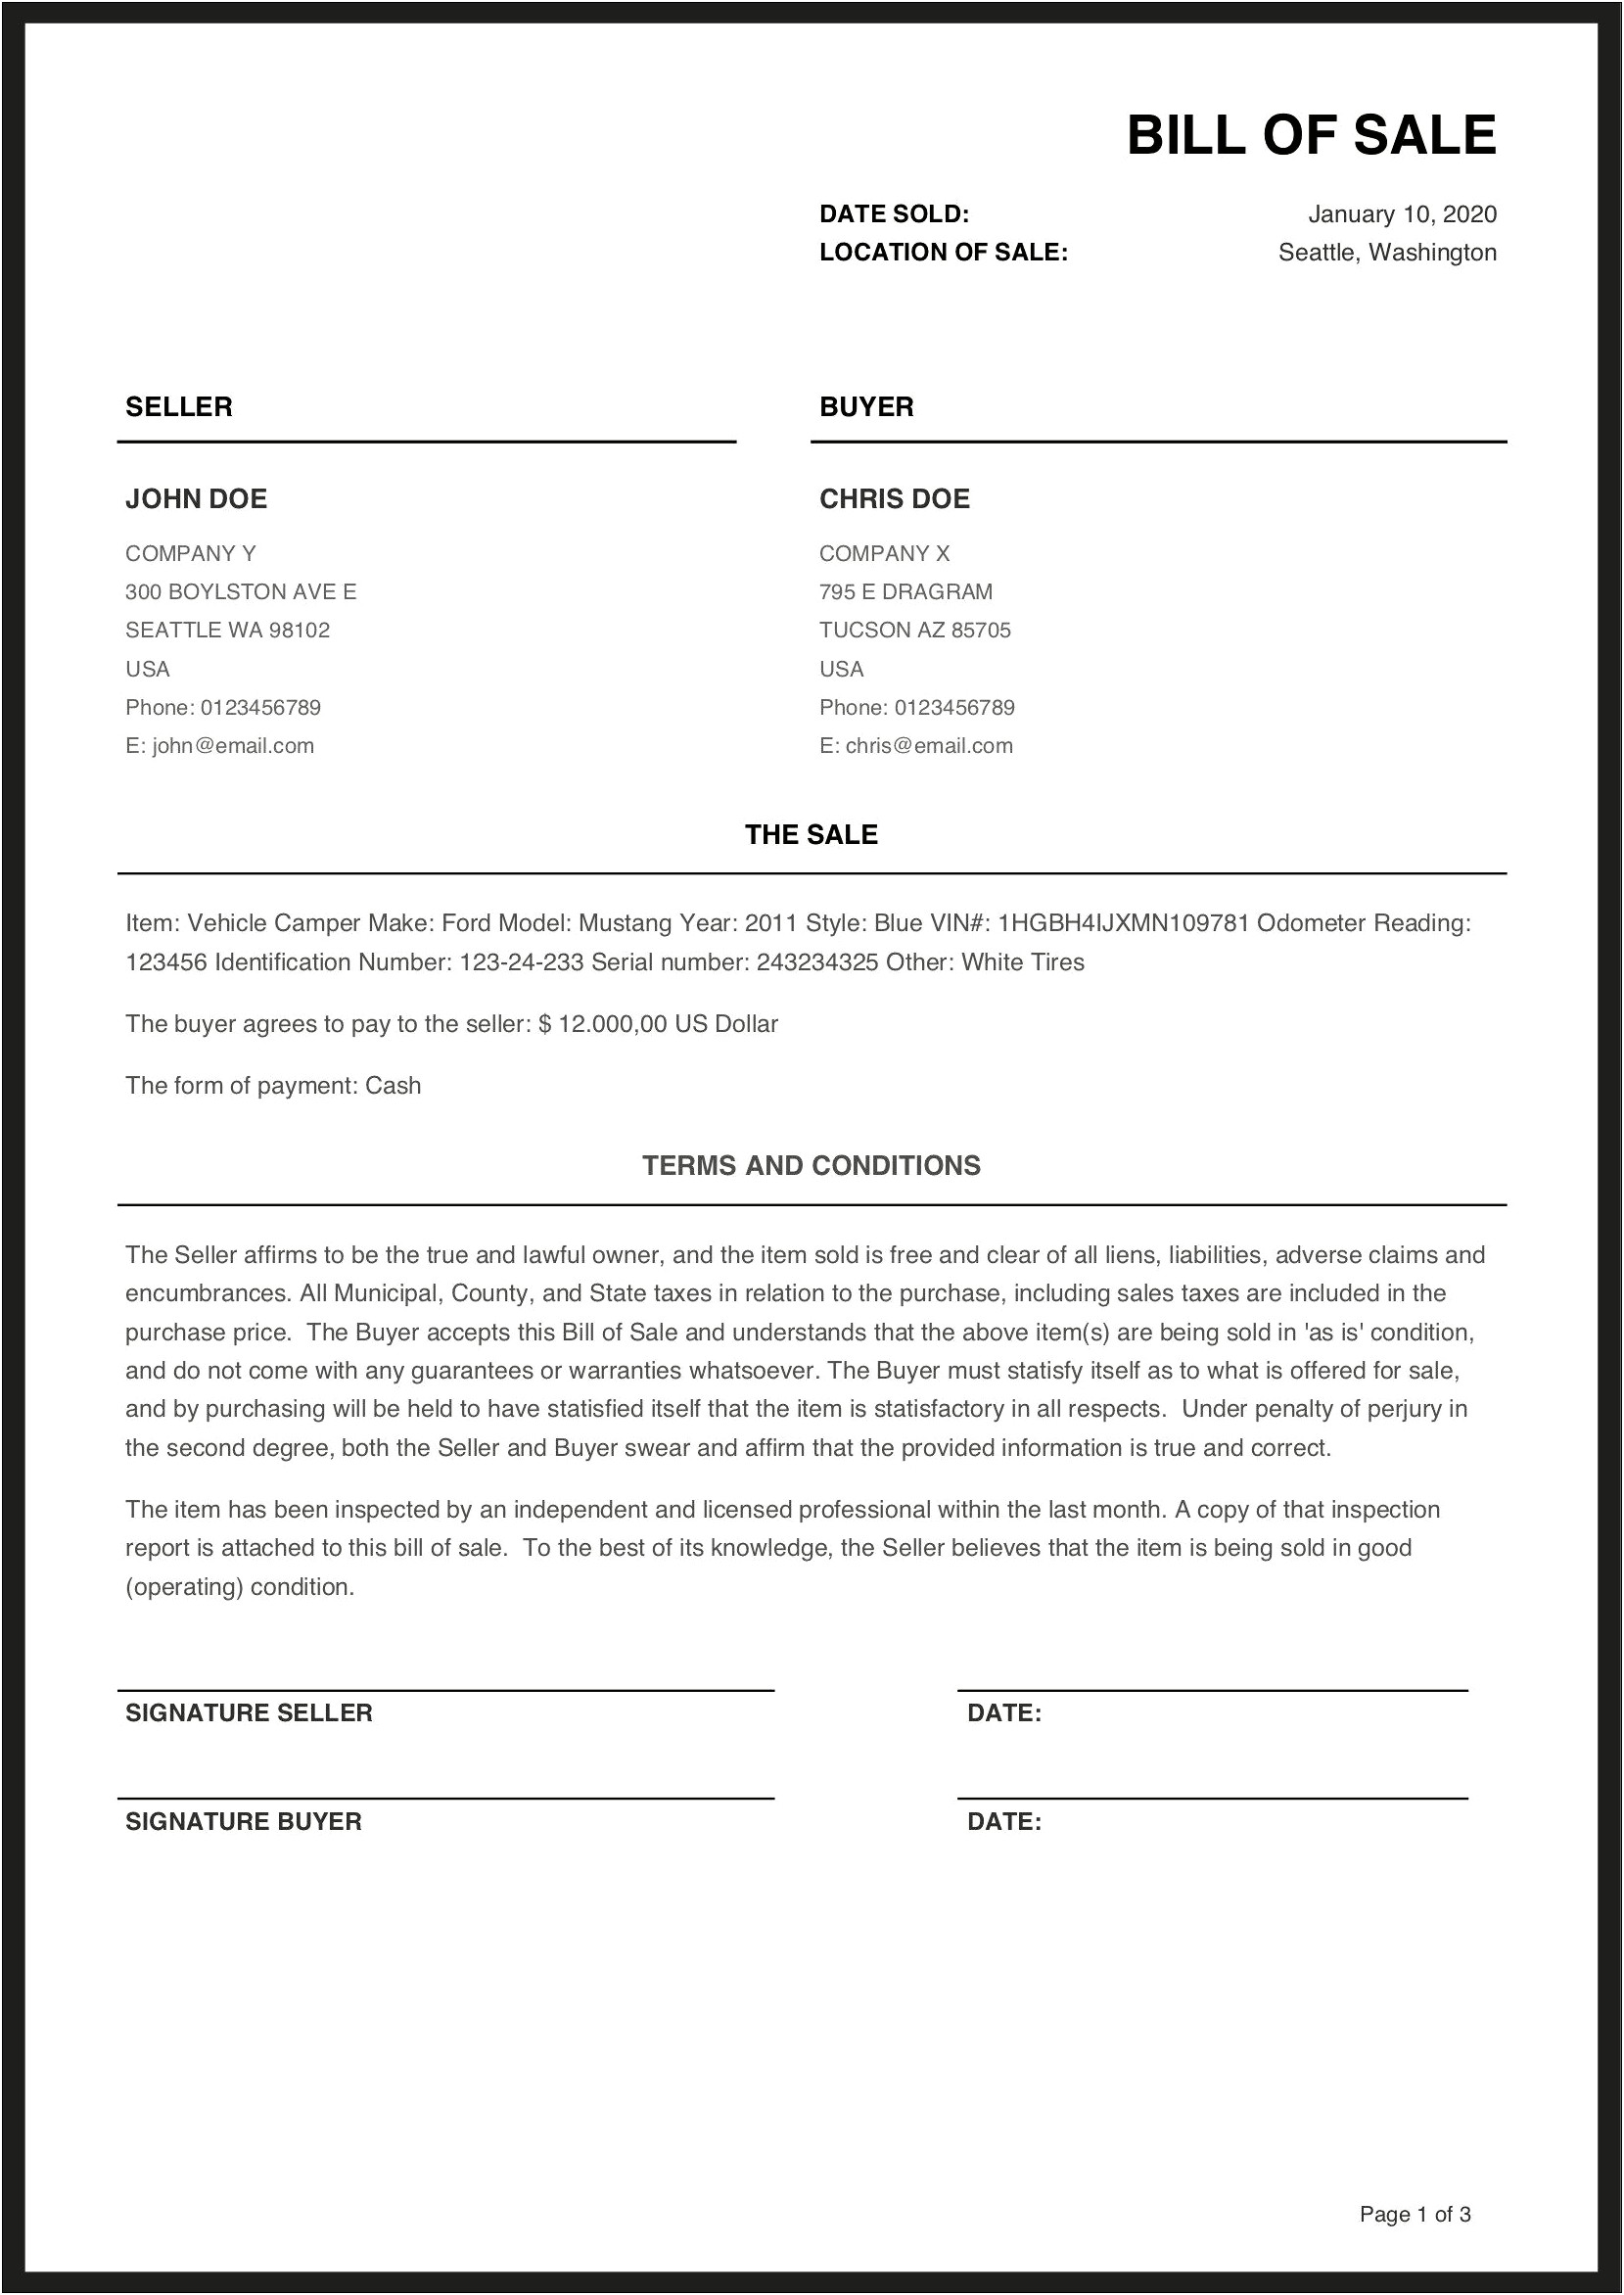 bill-of-sale-free-template-motorcycle-resume-example-gallery